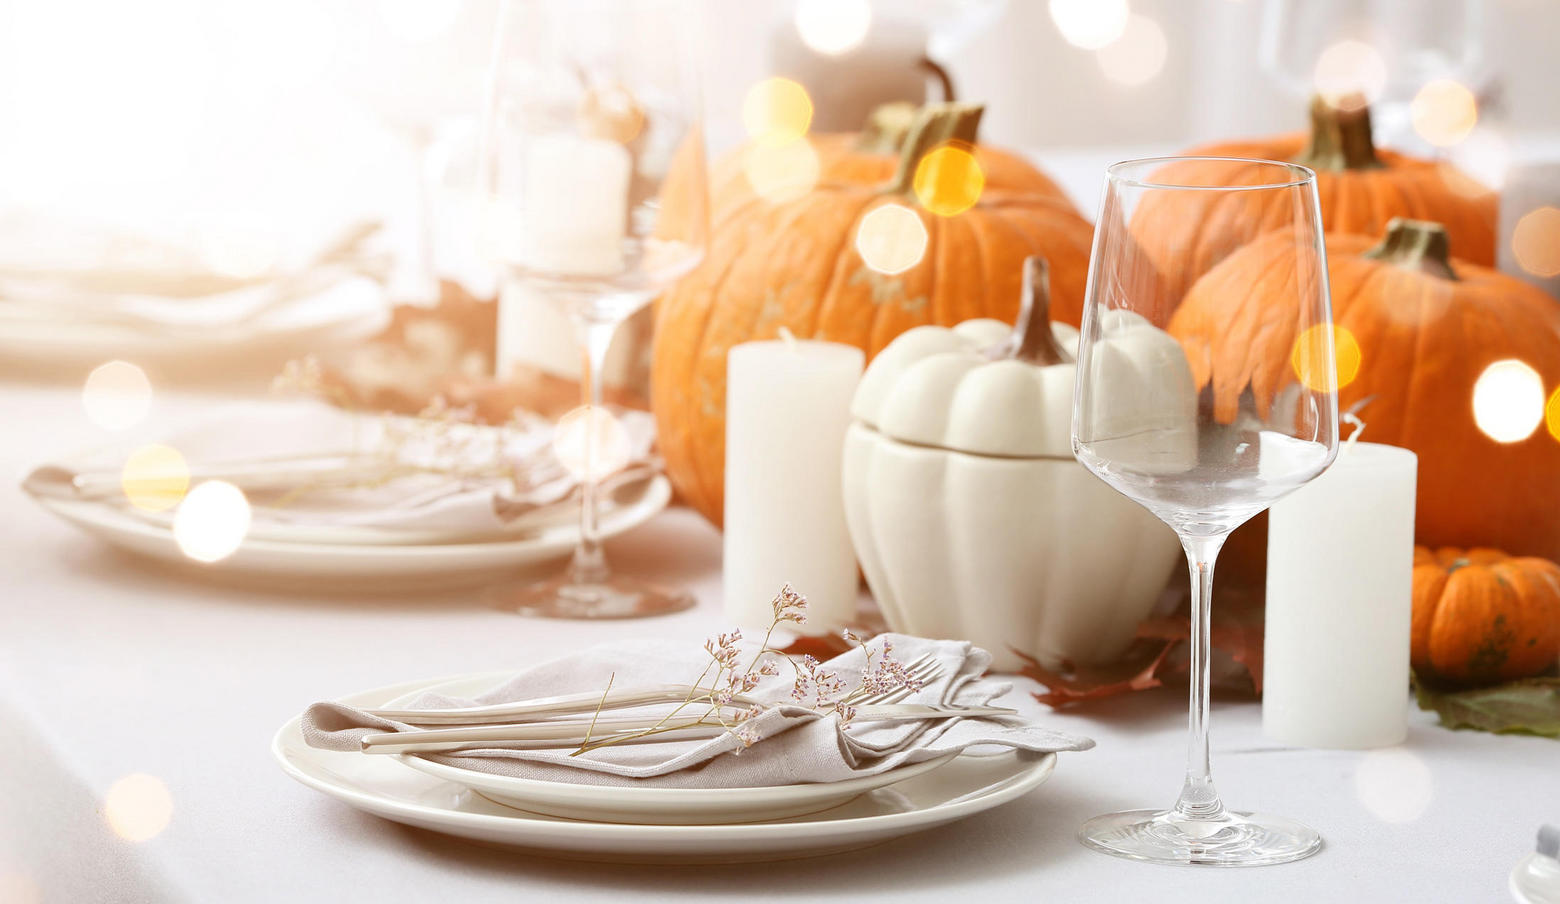 Fall table setting with pumpkins, place settings and candles